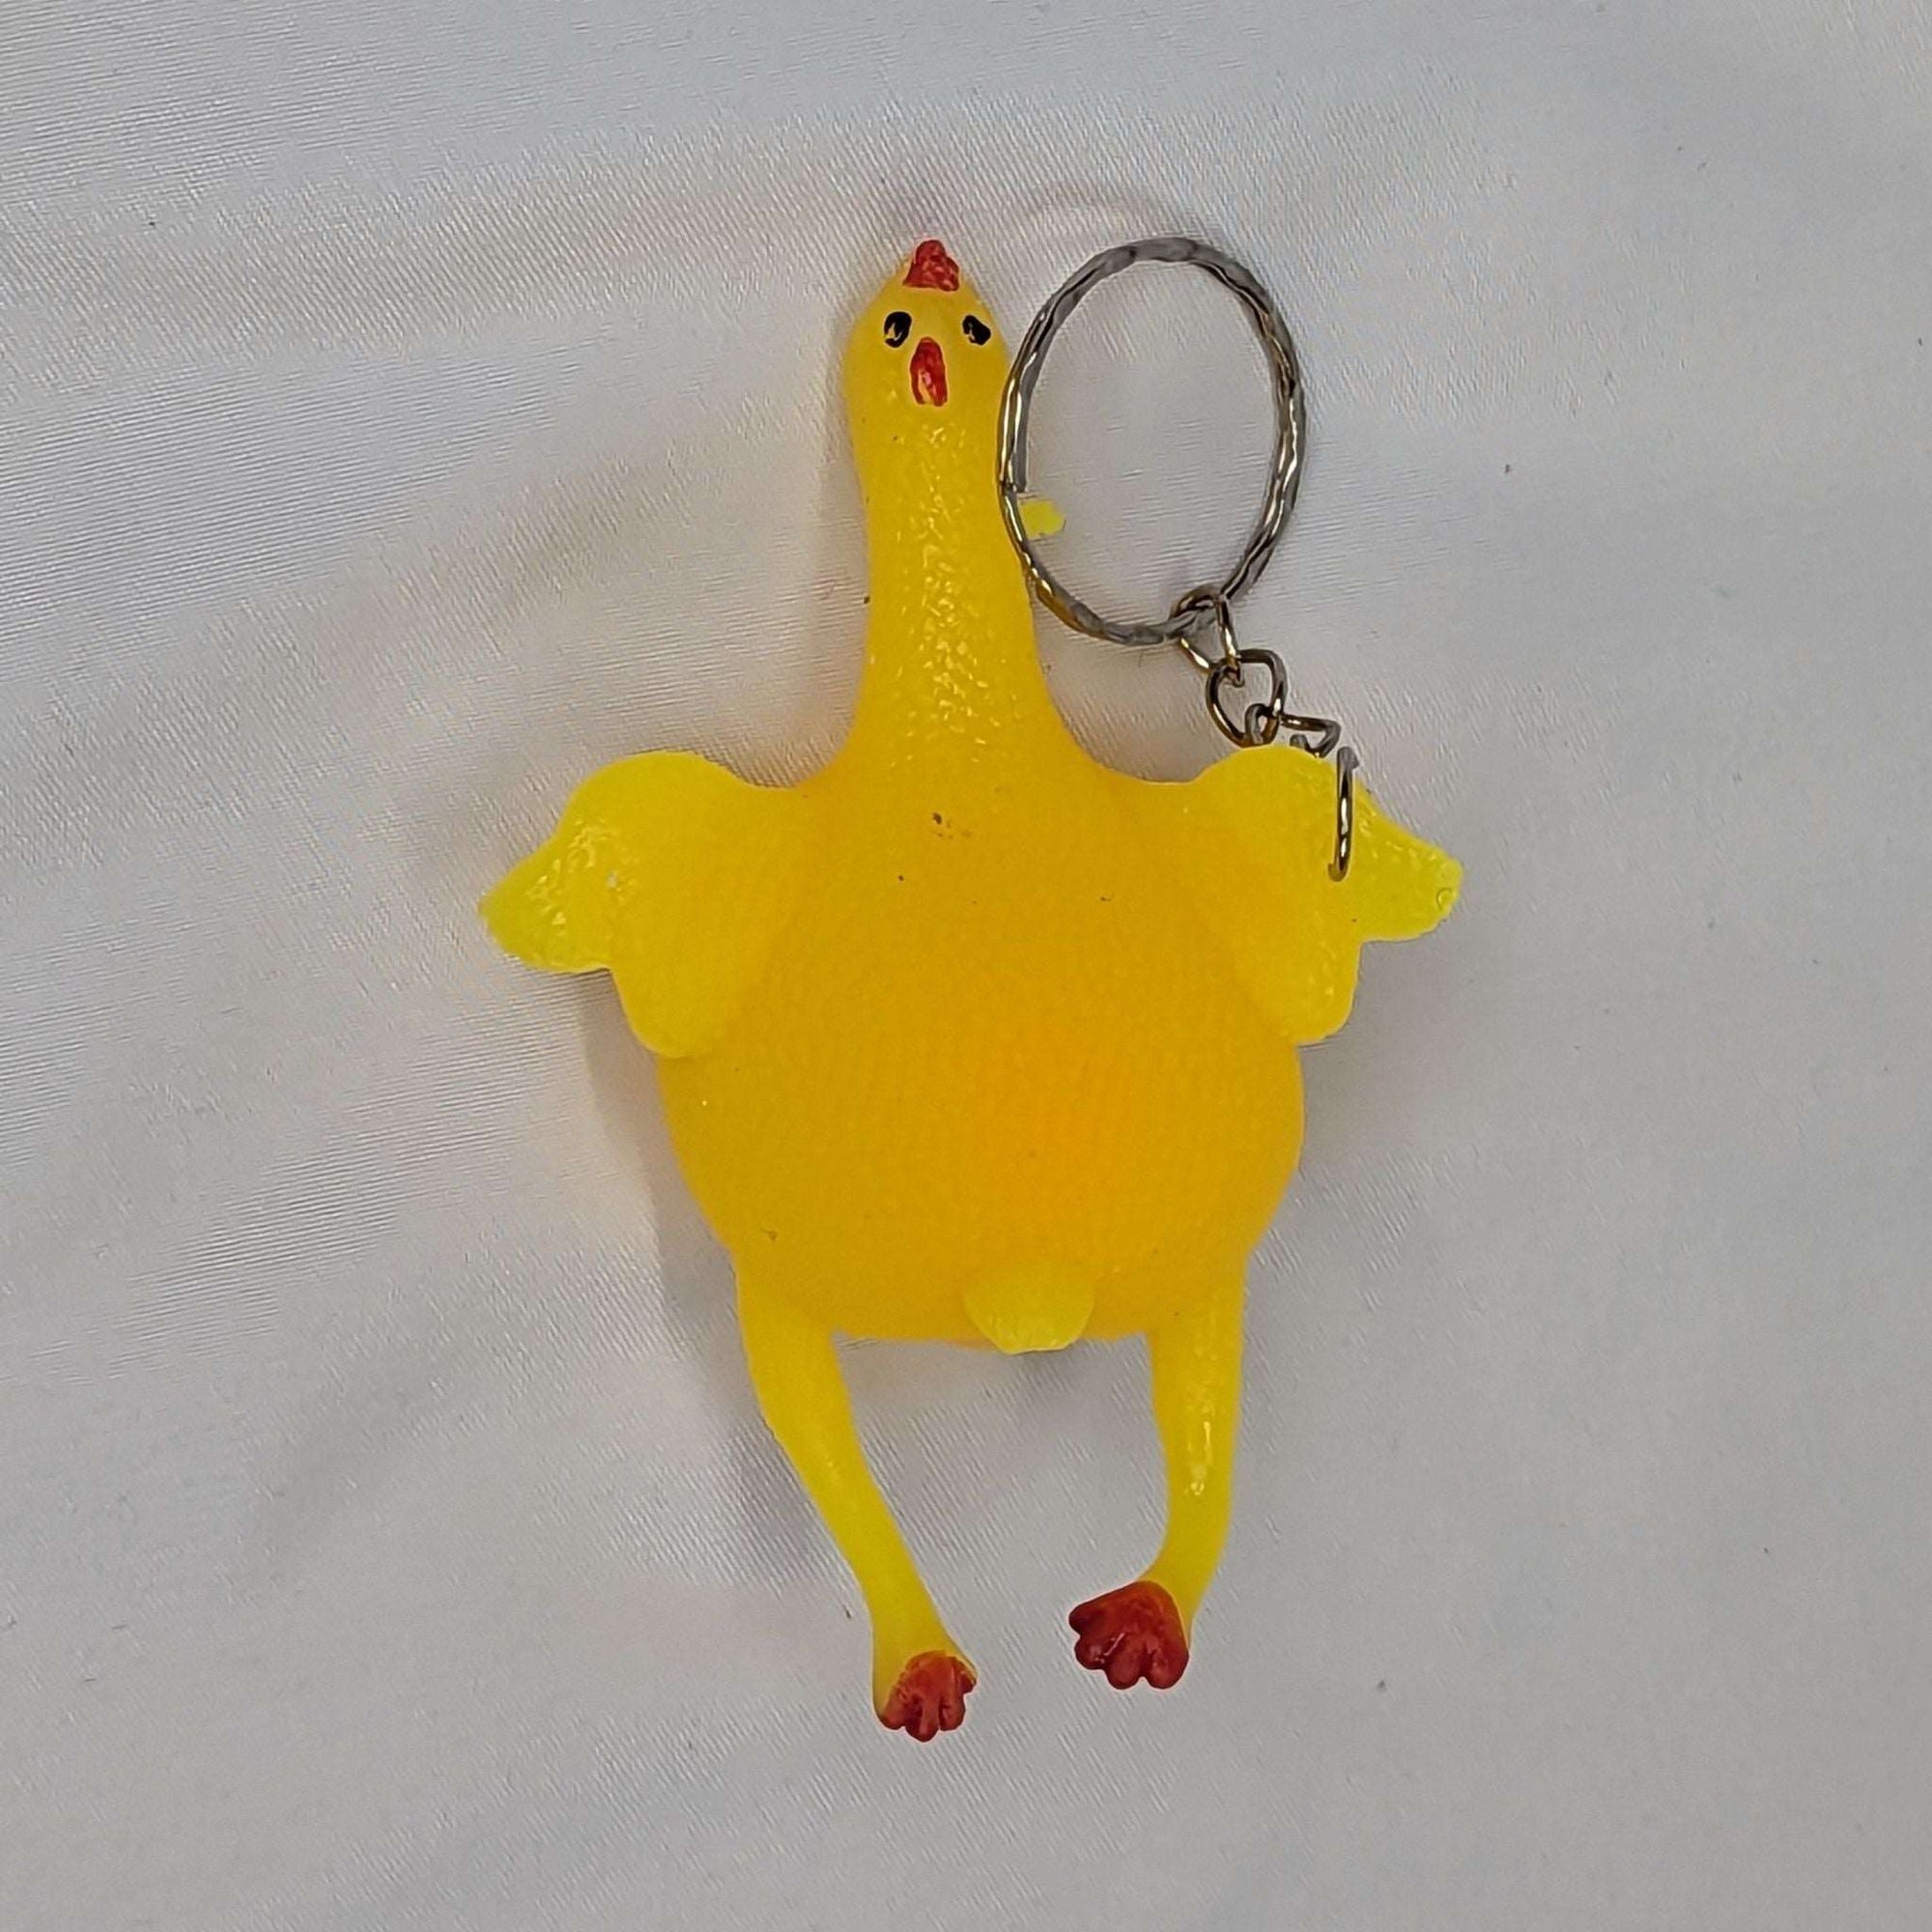 Cluck n' Squeeze Stress Ball Keychain